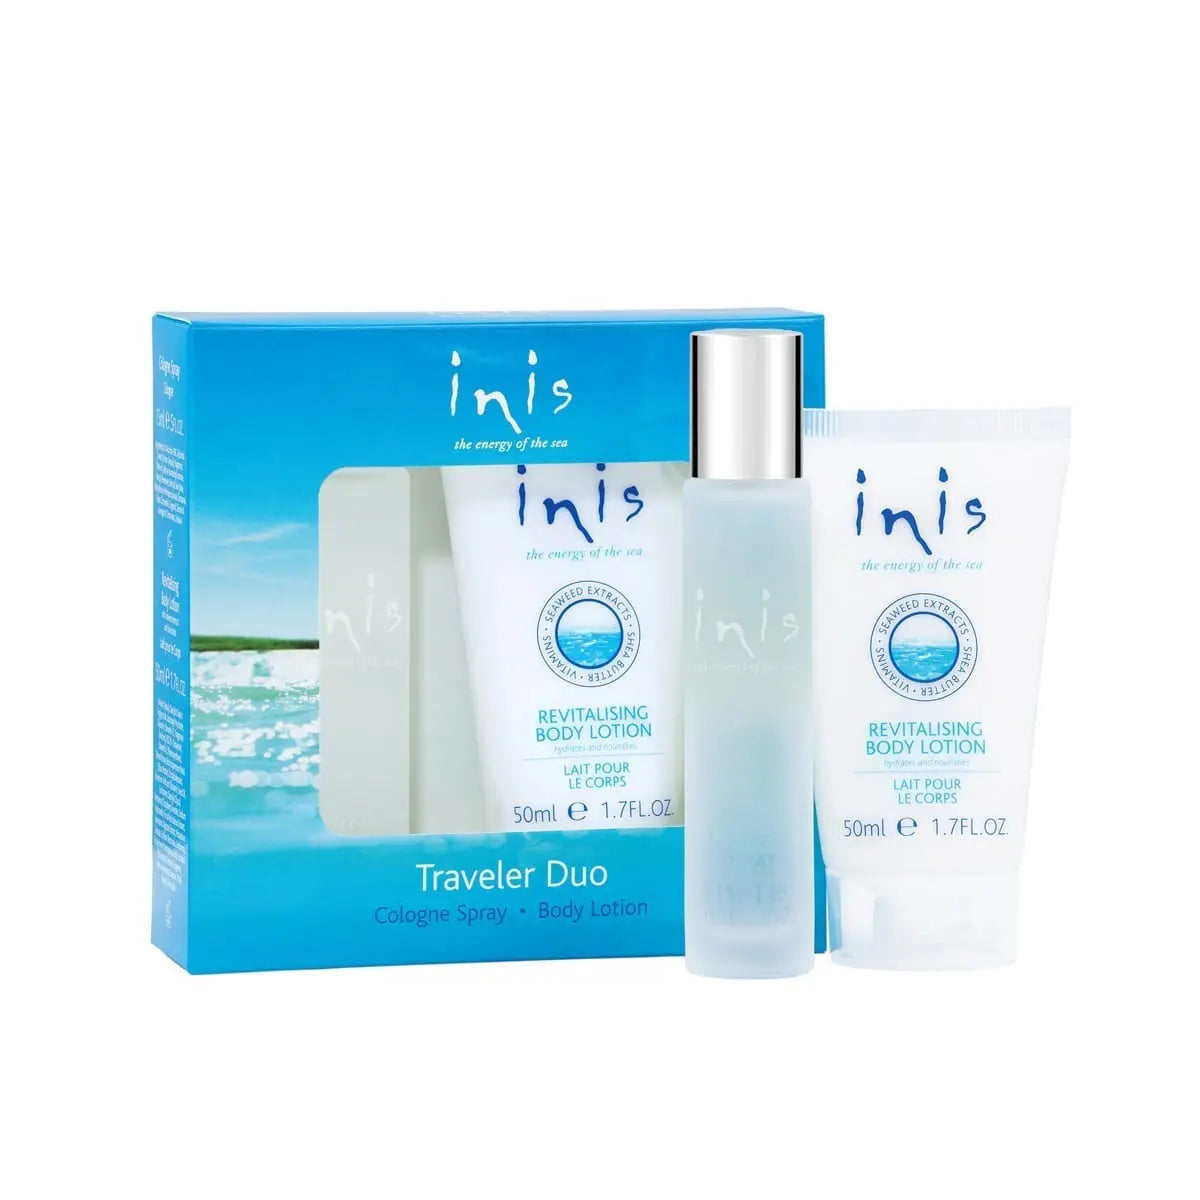 Inis - Travel Duo Cologne Spray & Body Lotion